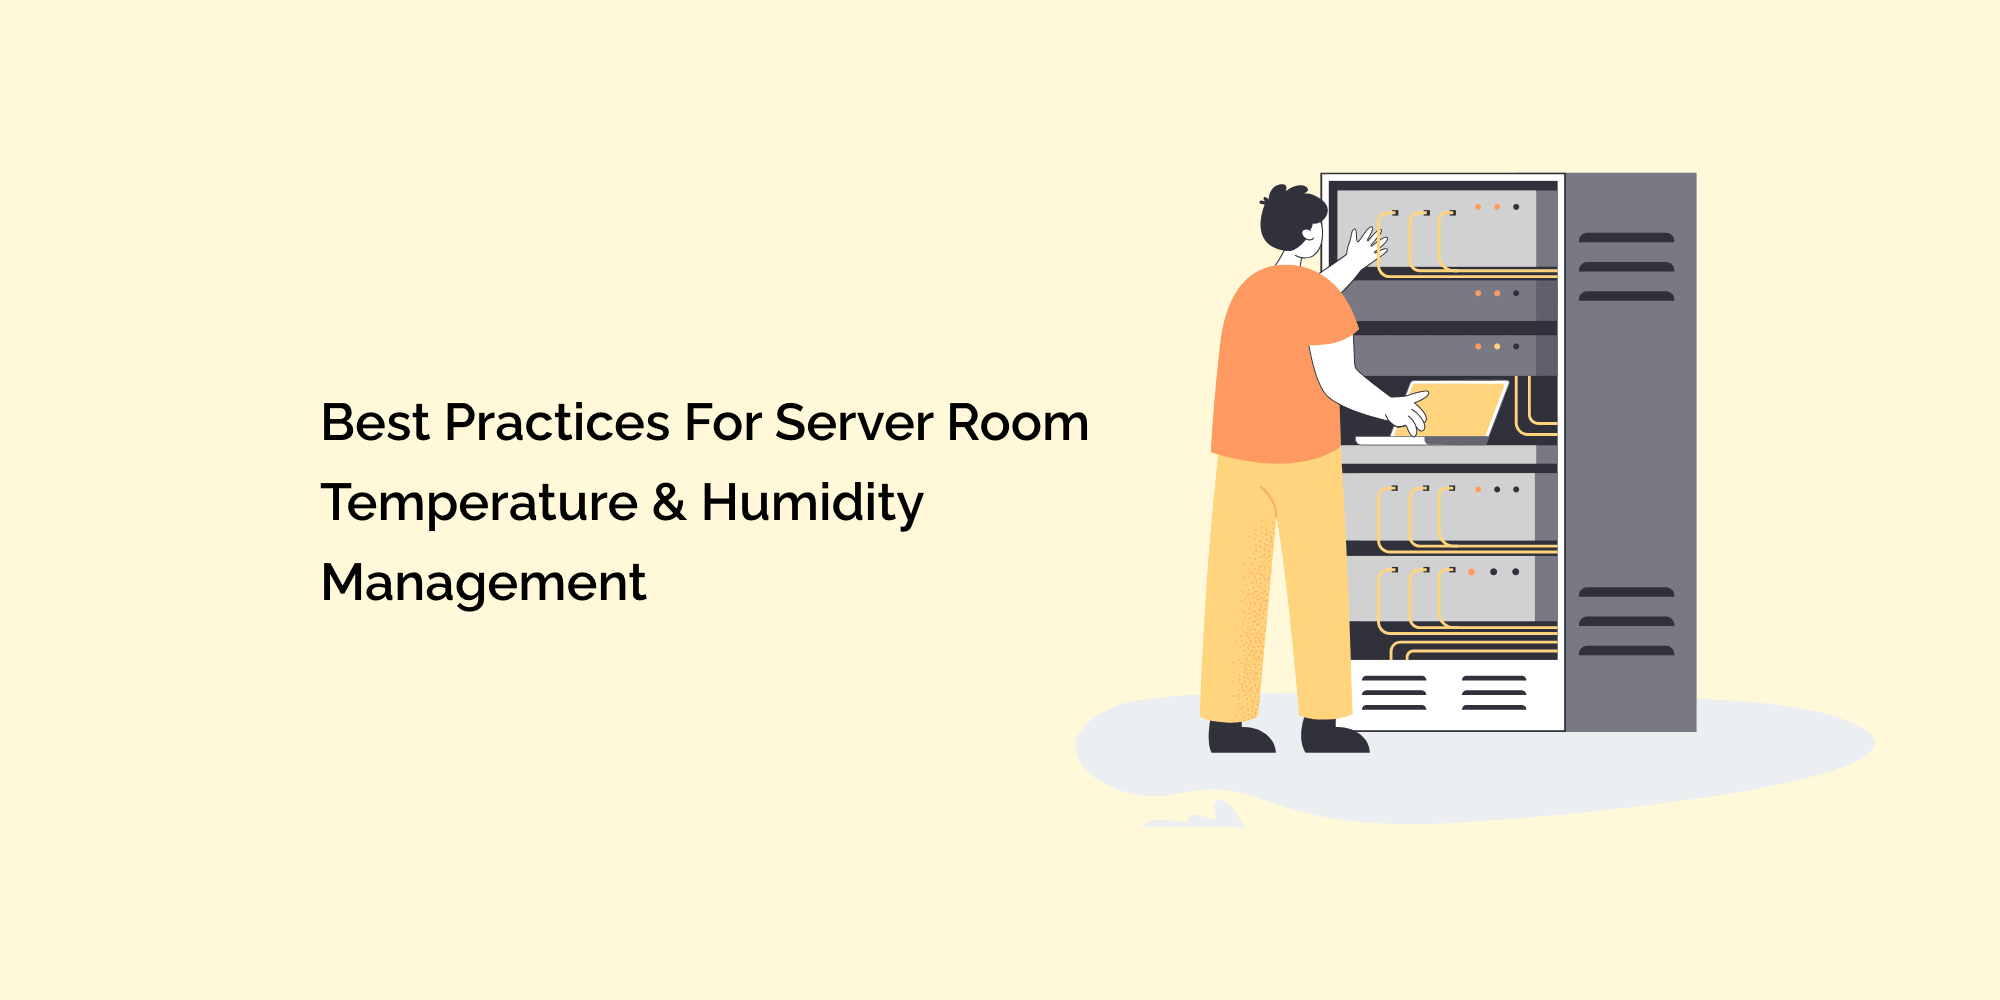 Best Practices for Server Room Temperature & Humidity Management